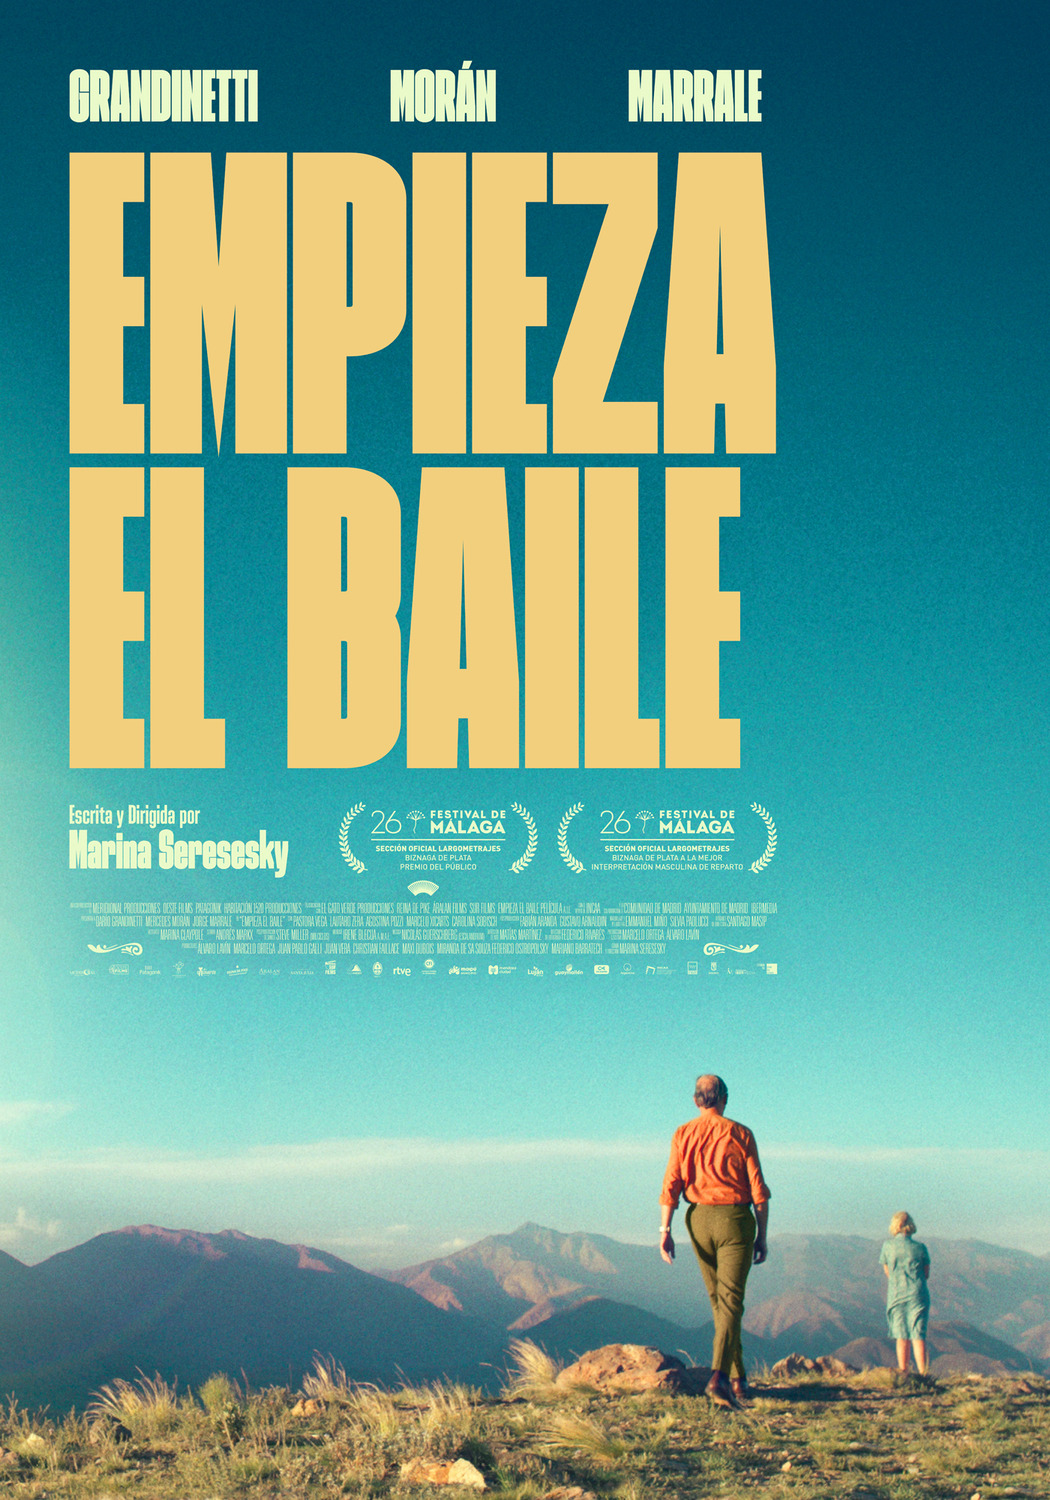 Extra Large Movie Poster Image for Empieza el baile (#3 of 3)